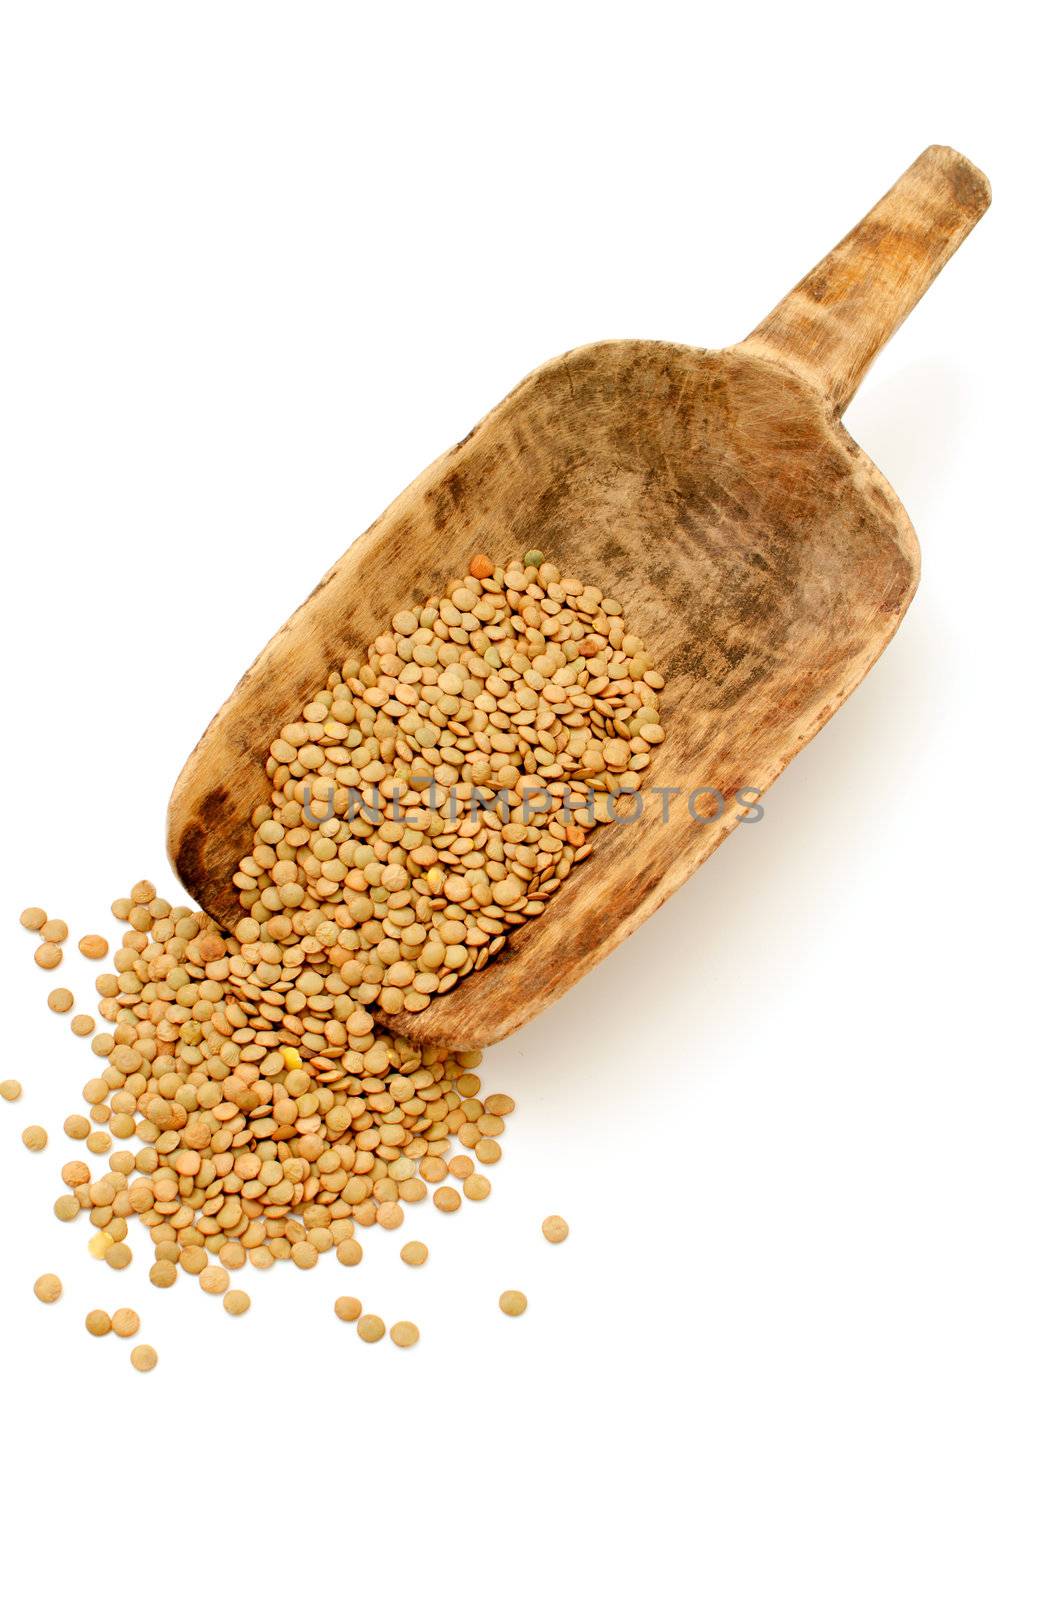 Lentil seeds on a white background by malija